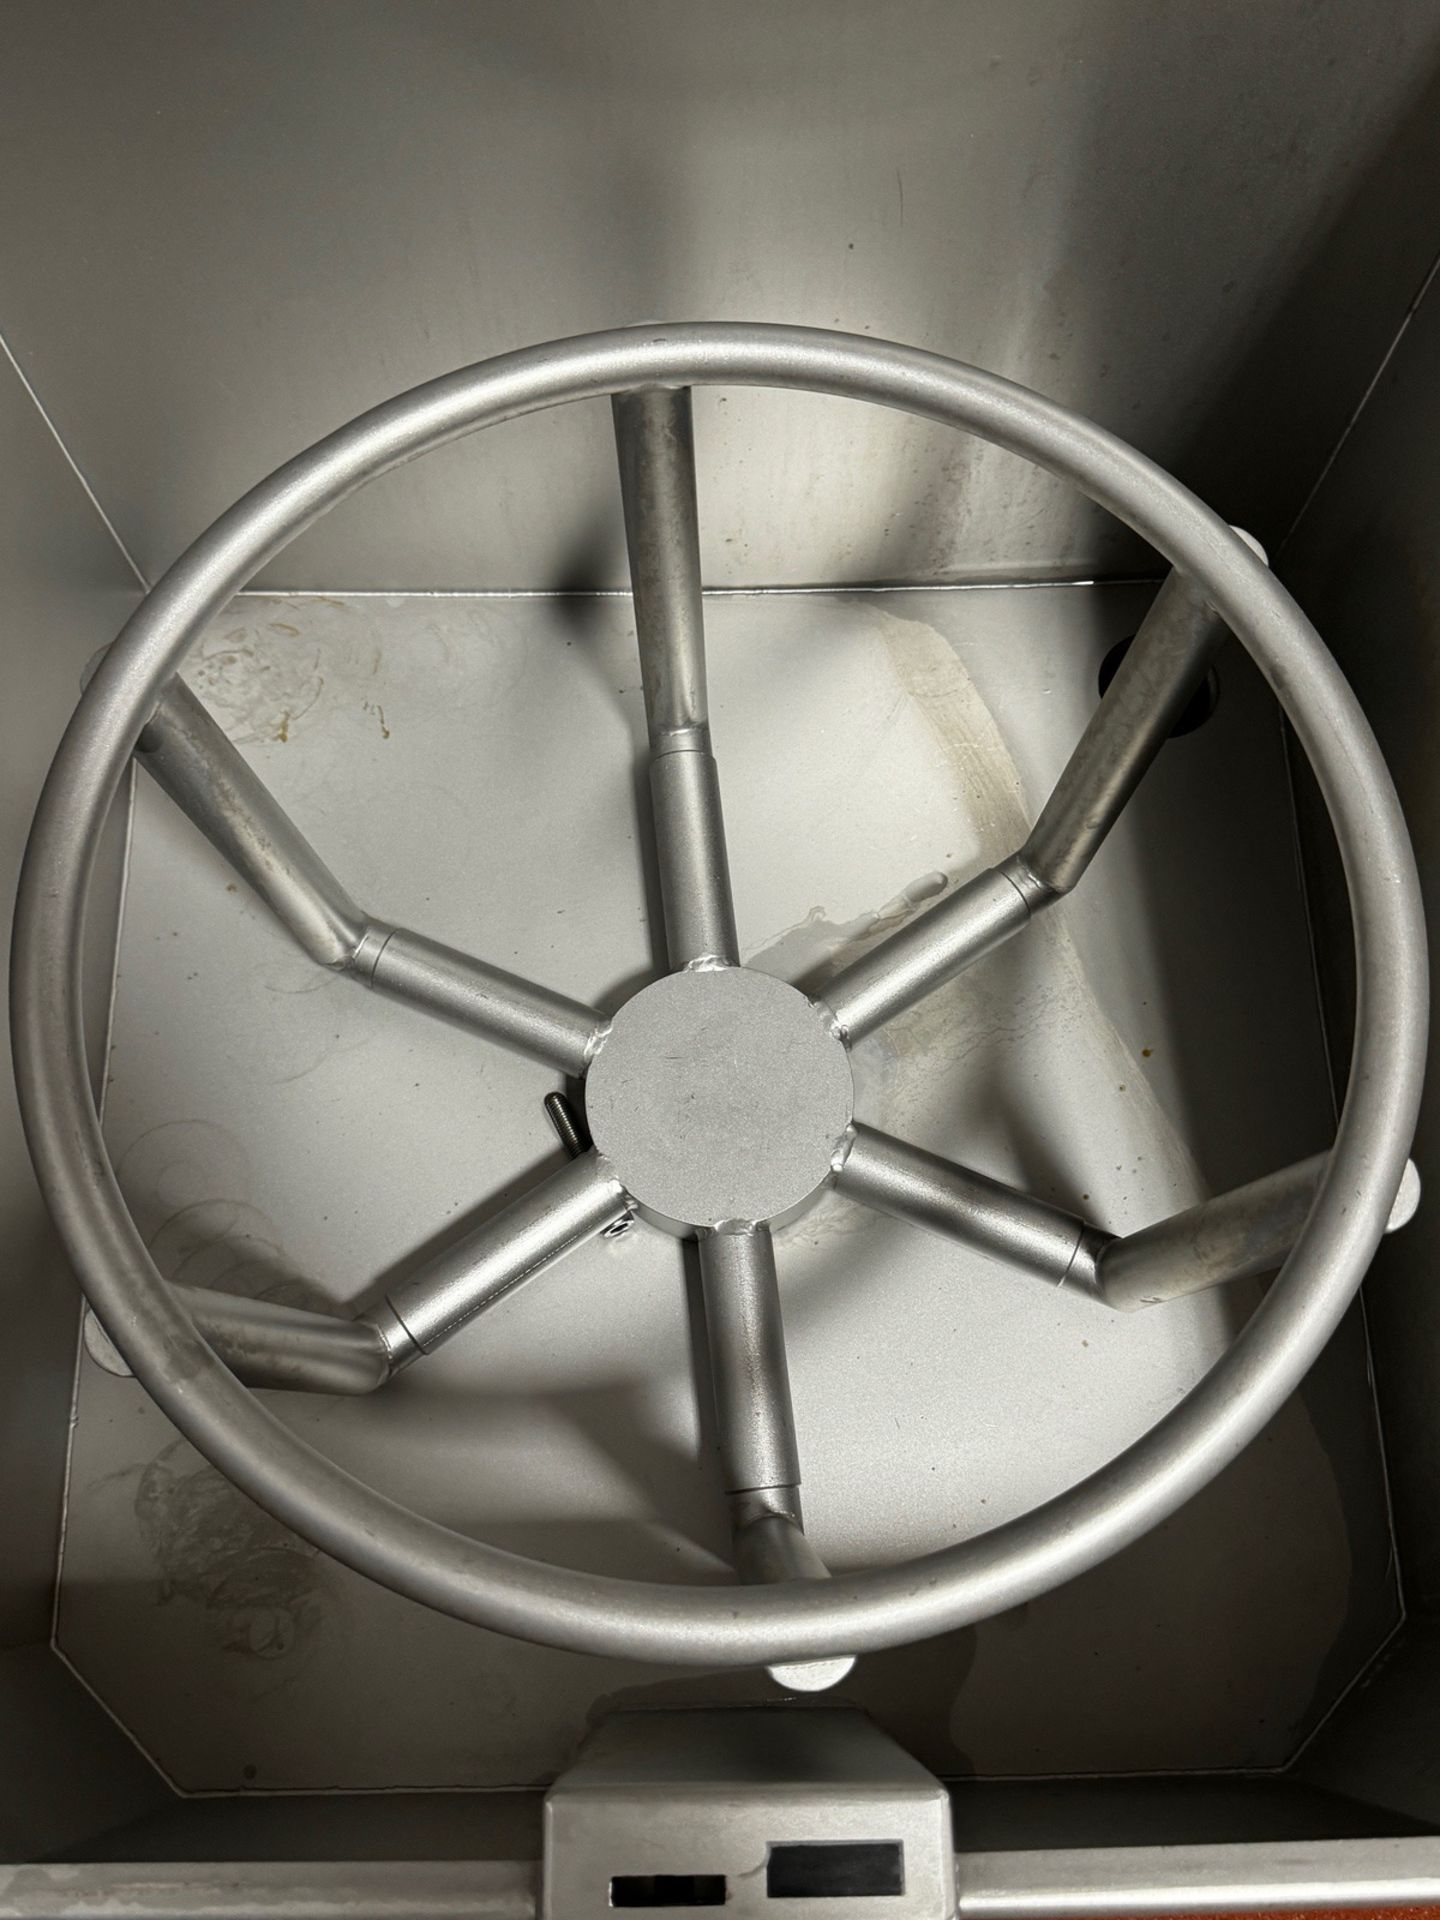 Kronen Stainless Steel Spin Dryer with Baskets | Rig Fee $150 - Image 3 of 3